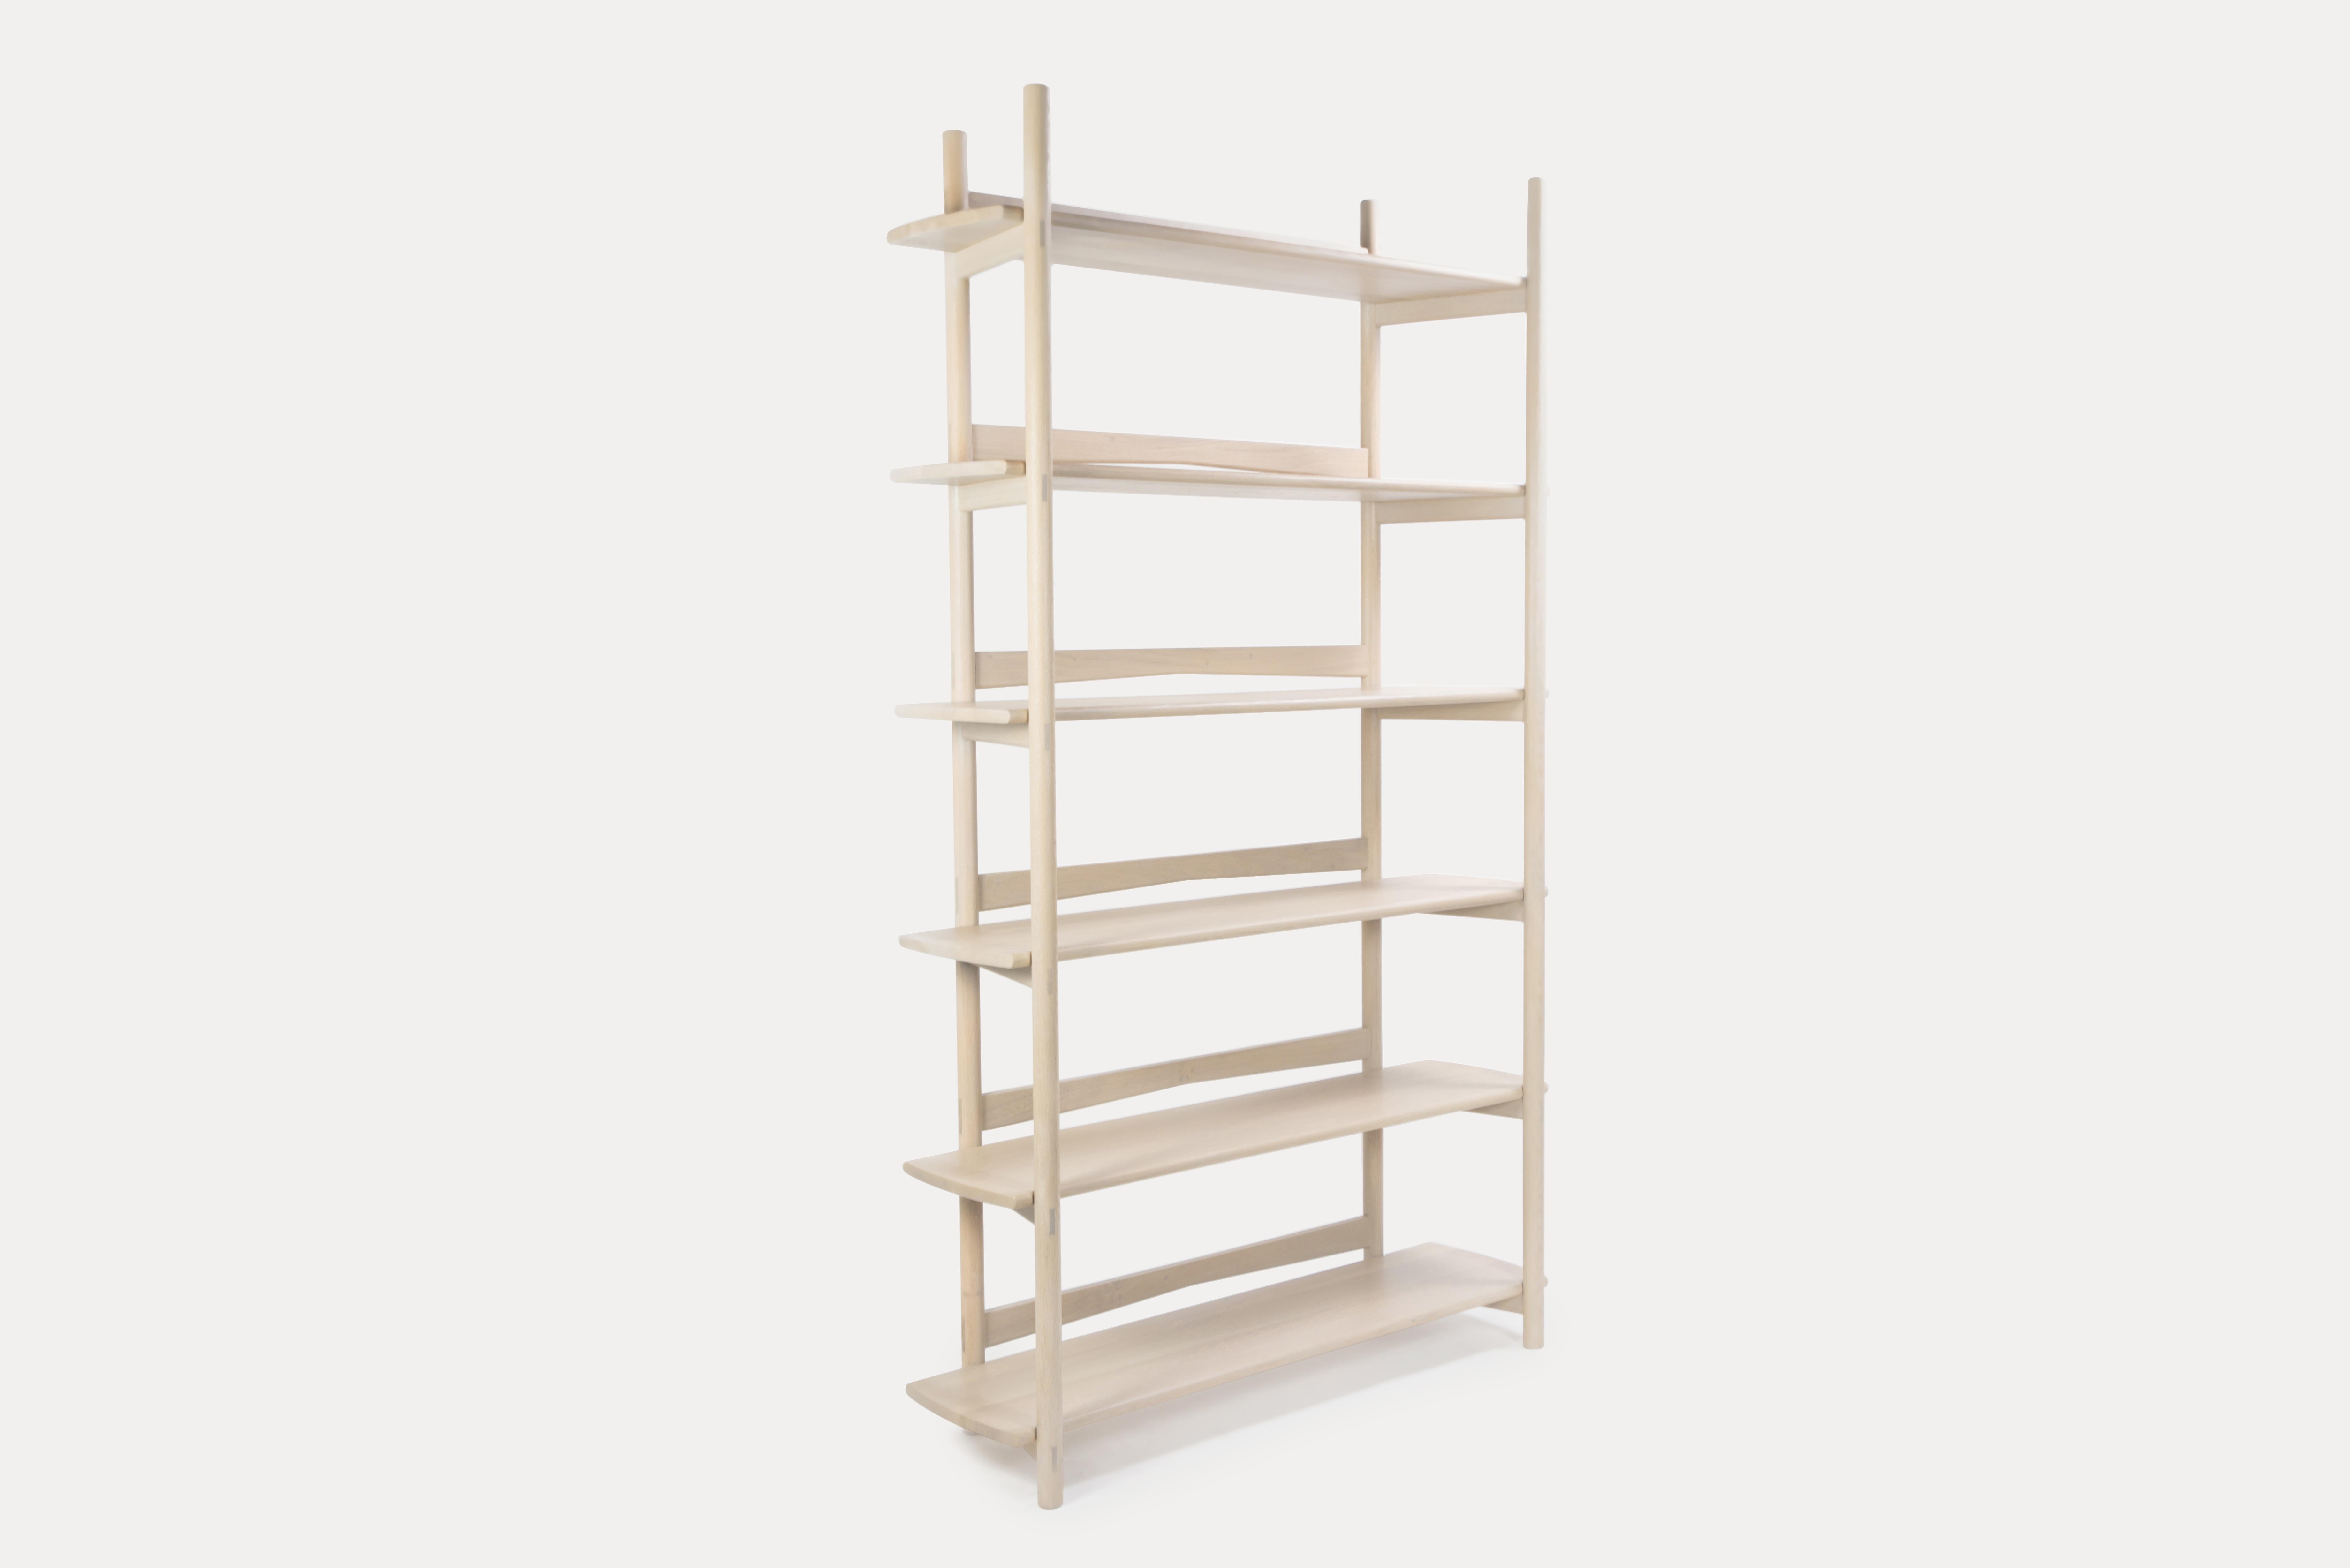 Chinese Mora Bookcase by Sun at Six, Nude, Minimalist Bookcase in Oak Wood